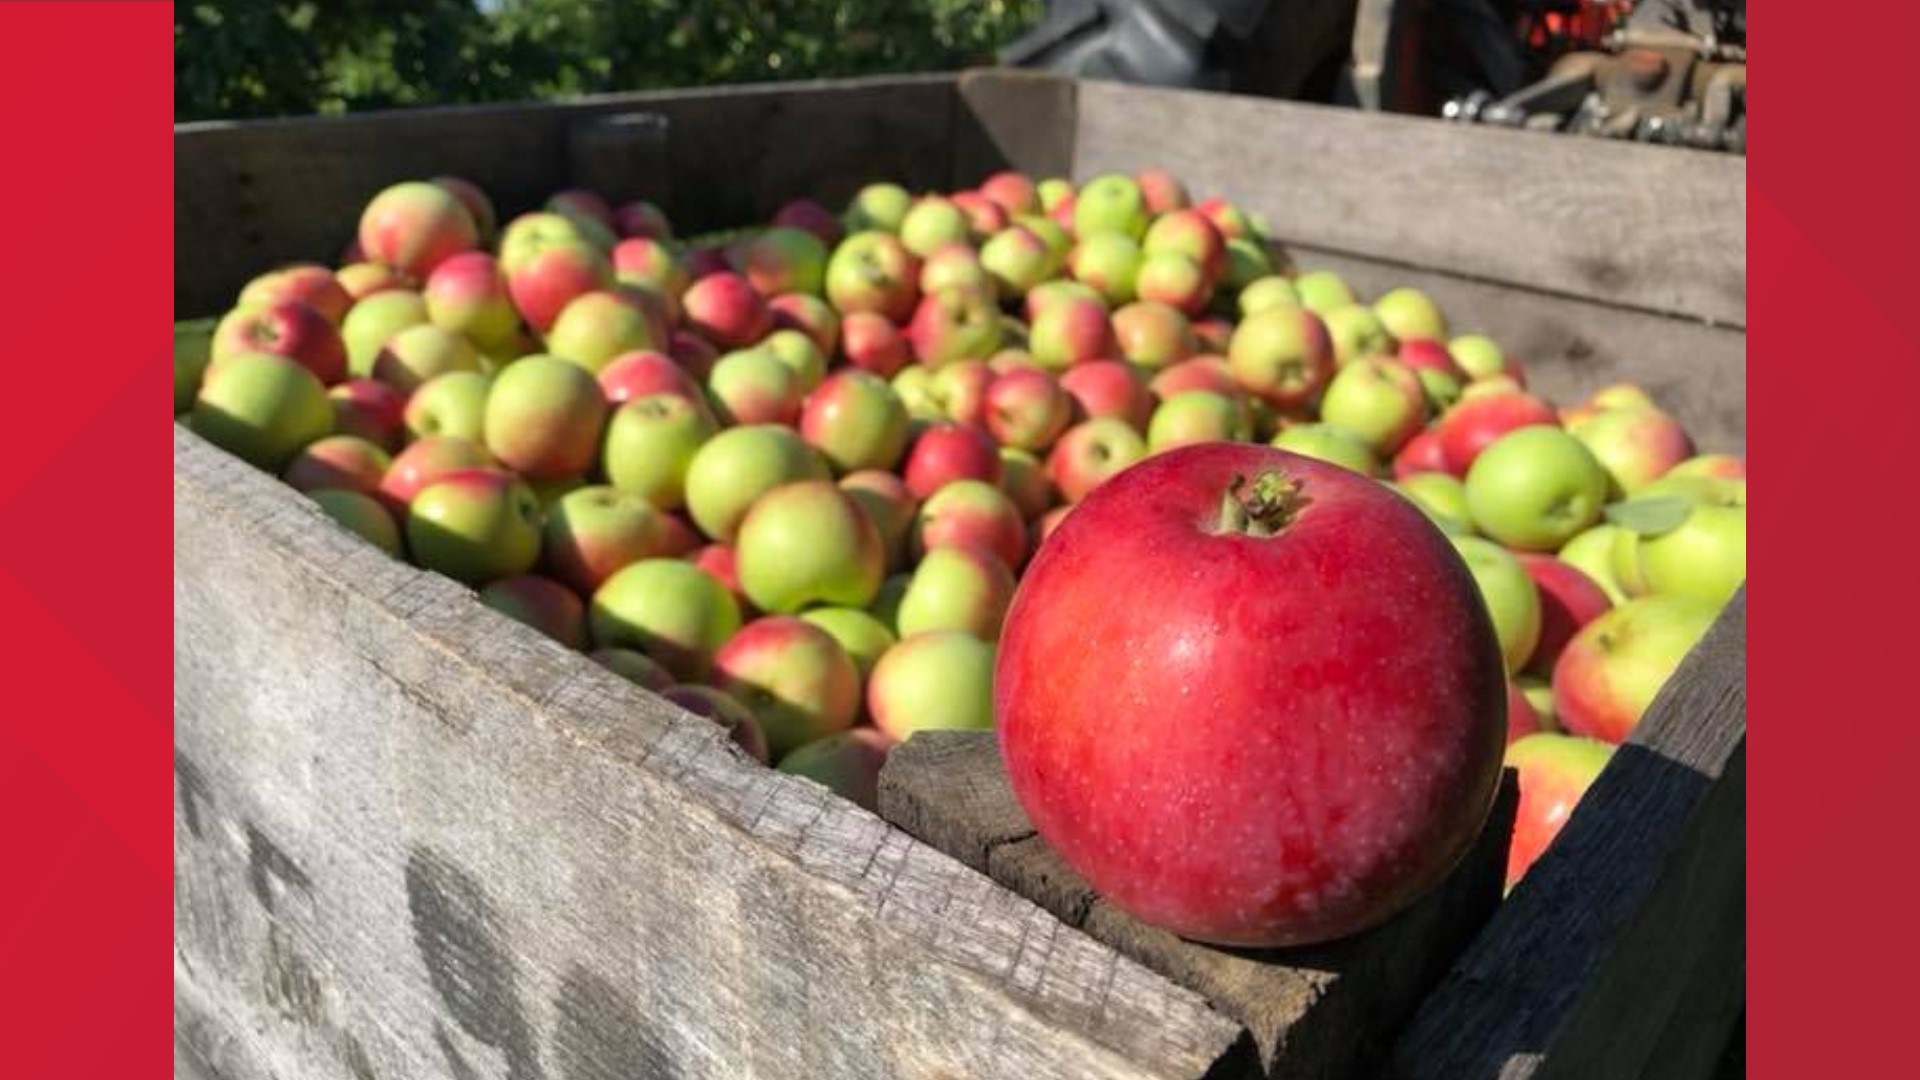 It's almost the first weekend of fall and with the new season comes hayrides, corn mazes and of course, apples! Ring in fall at Robinette's!